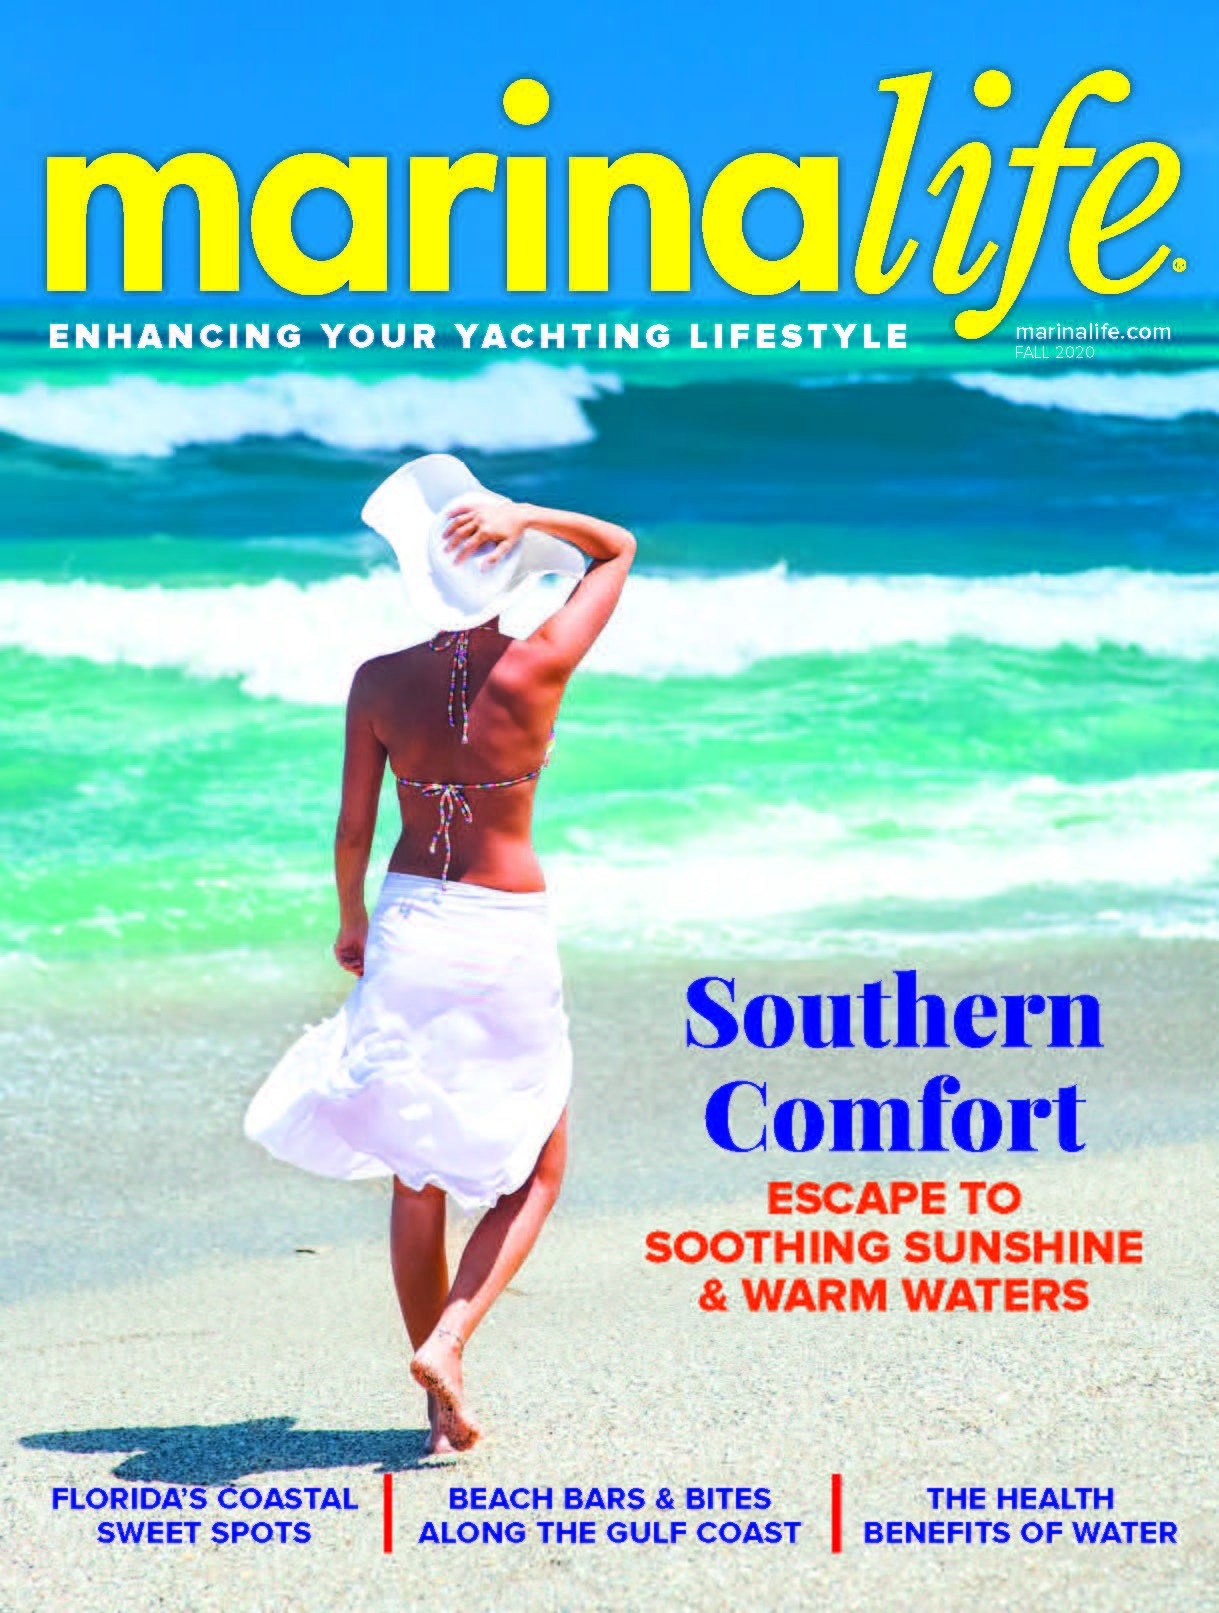 Marinalife Magazine Fall 2020 - Escape to Southern Comfort